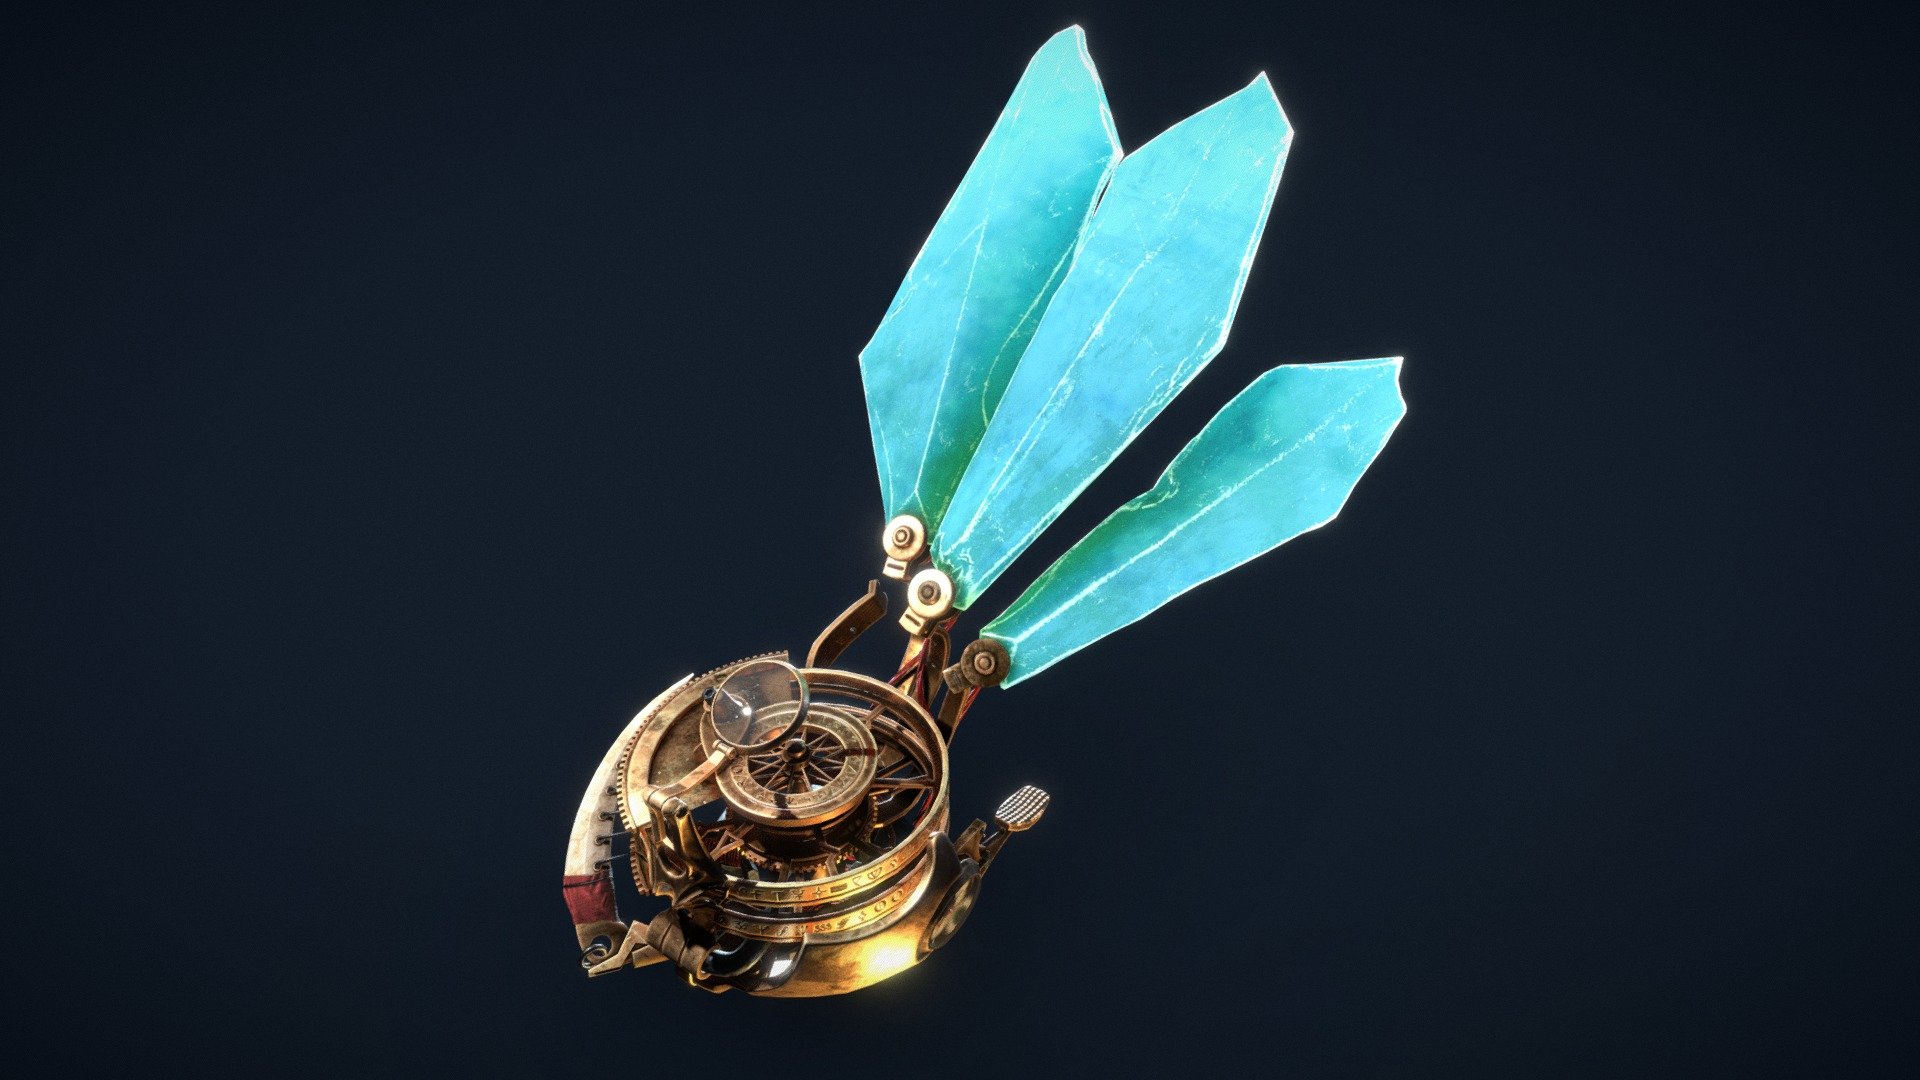 I haven't uploaded anything to sketchfab for a long time. I decided to share a compass that I made in a couple of evenings based on concepts from the game Dishonored

My Artstation: https://www.artstation.com/mar_cos - Stylized Magic Compass - Download Free 3D model by MAR.COS. 3d model